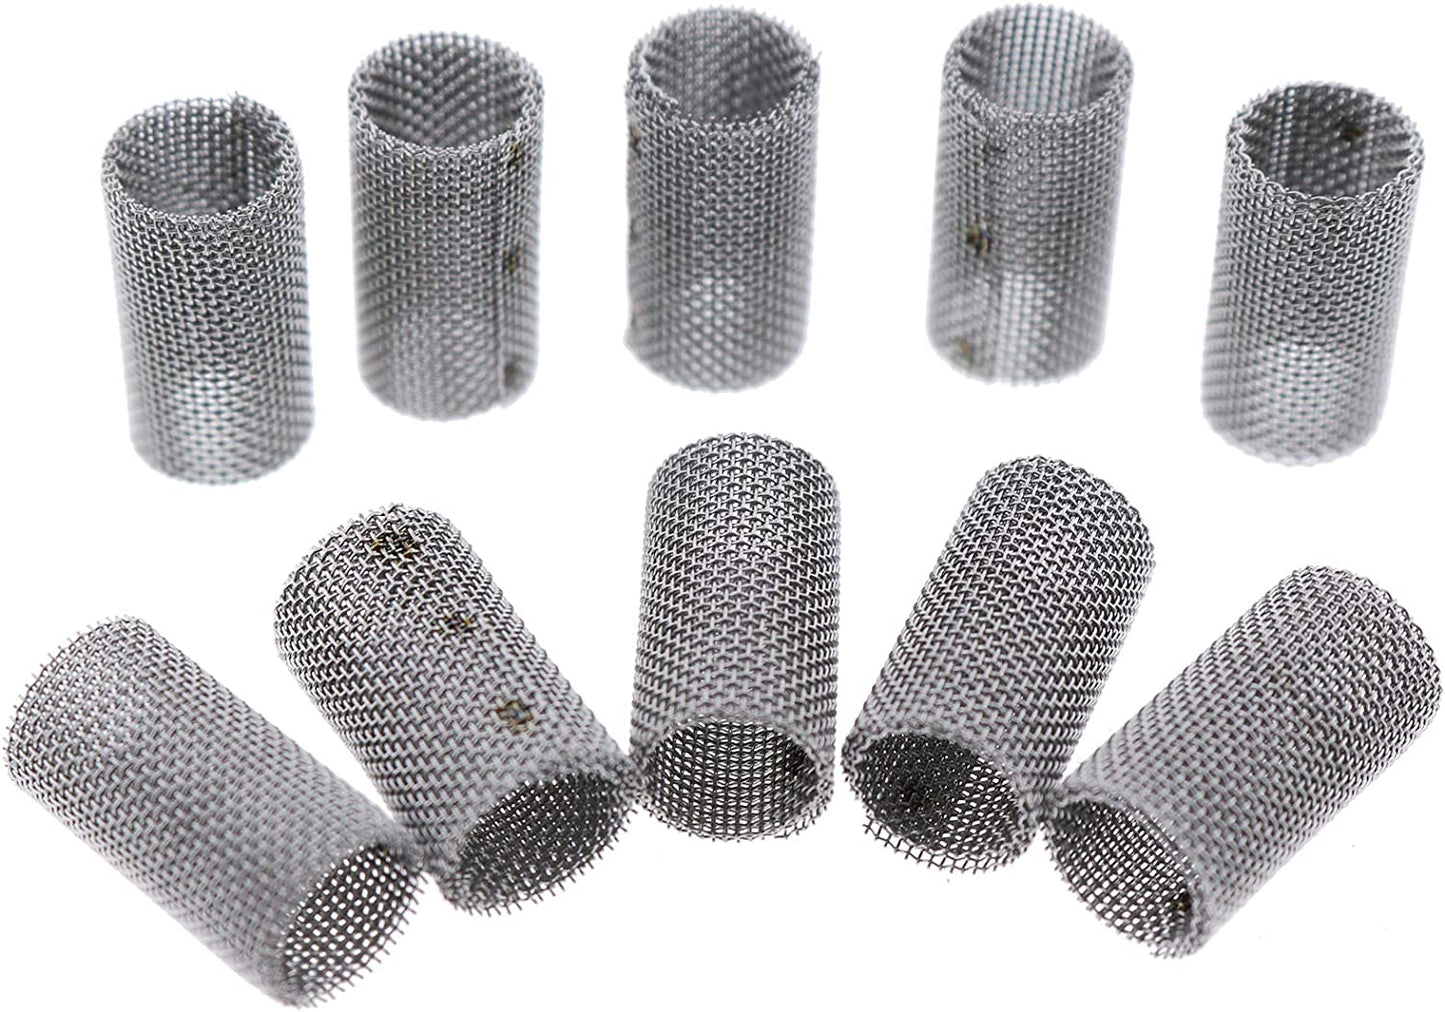 New 10PCS Stainless Steel Glow Pin Plug Burner Strainer Filter Screen 252069100102 for Eberspacher Heater Airtronic D2 D4 D4S